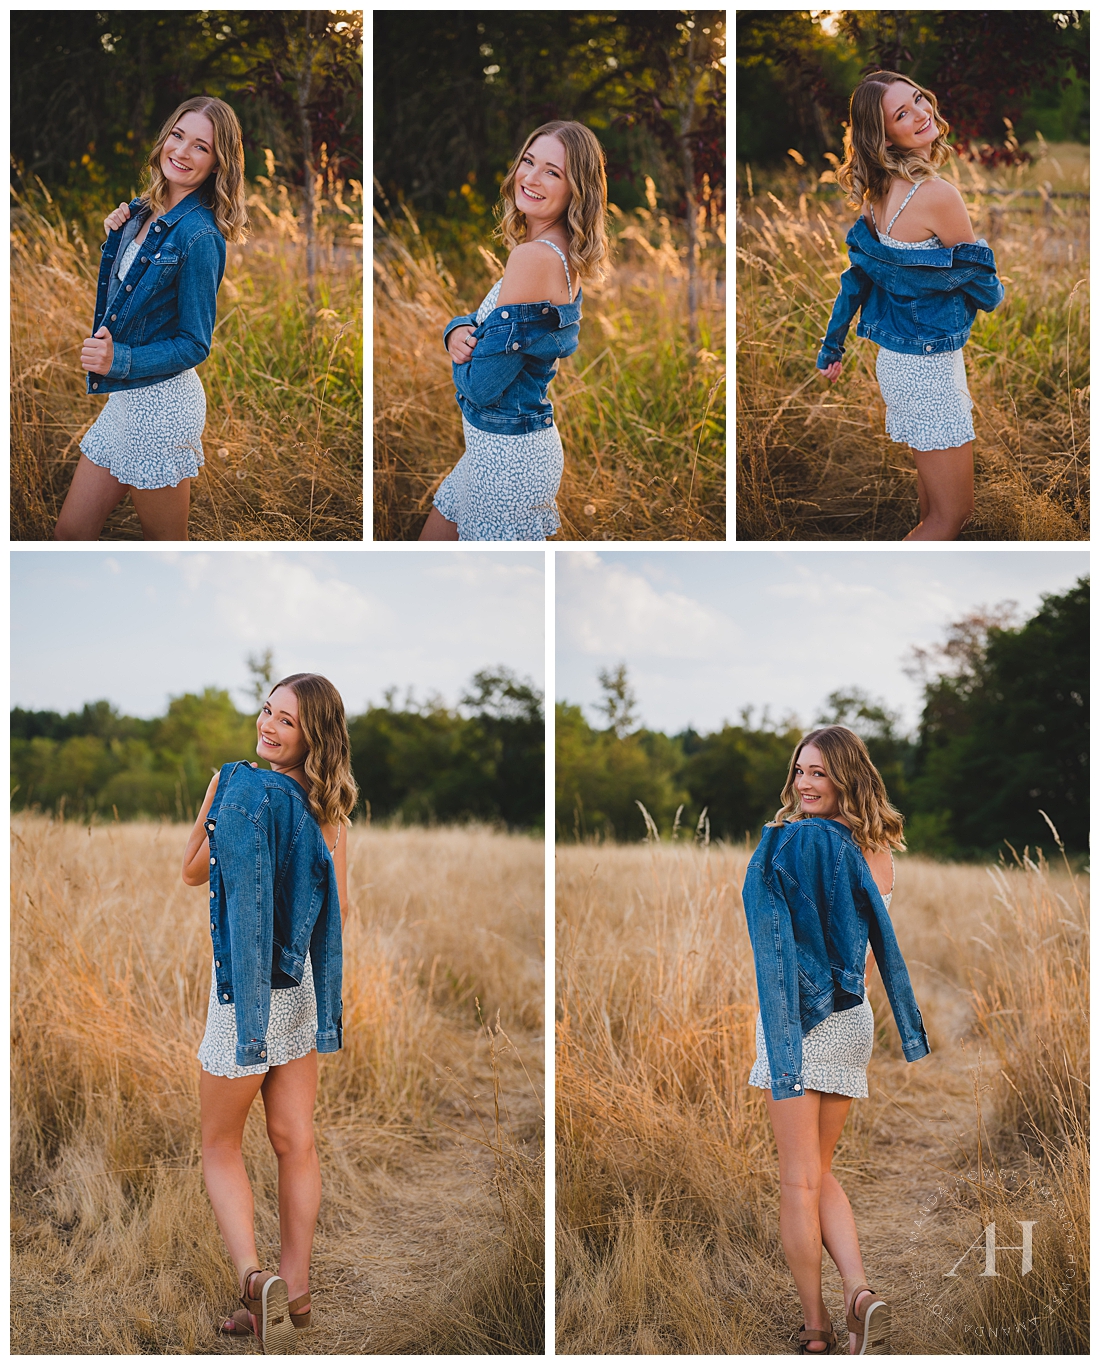 Best Jean Jacket Outfit Ideas for Senior Pics | Cute Rural Locations in Tacoma for Photoshoots, Patterned Dress and Jean Jacket Outfit | Photographed by the Best Tacoma Senior Photographer Amanda Howse Photography